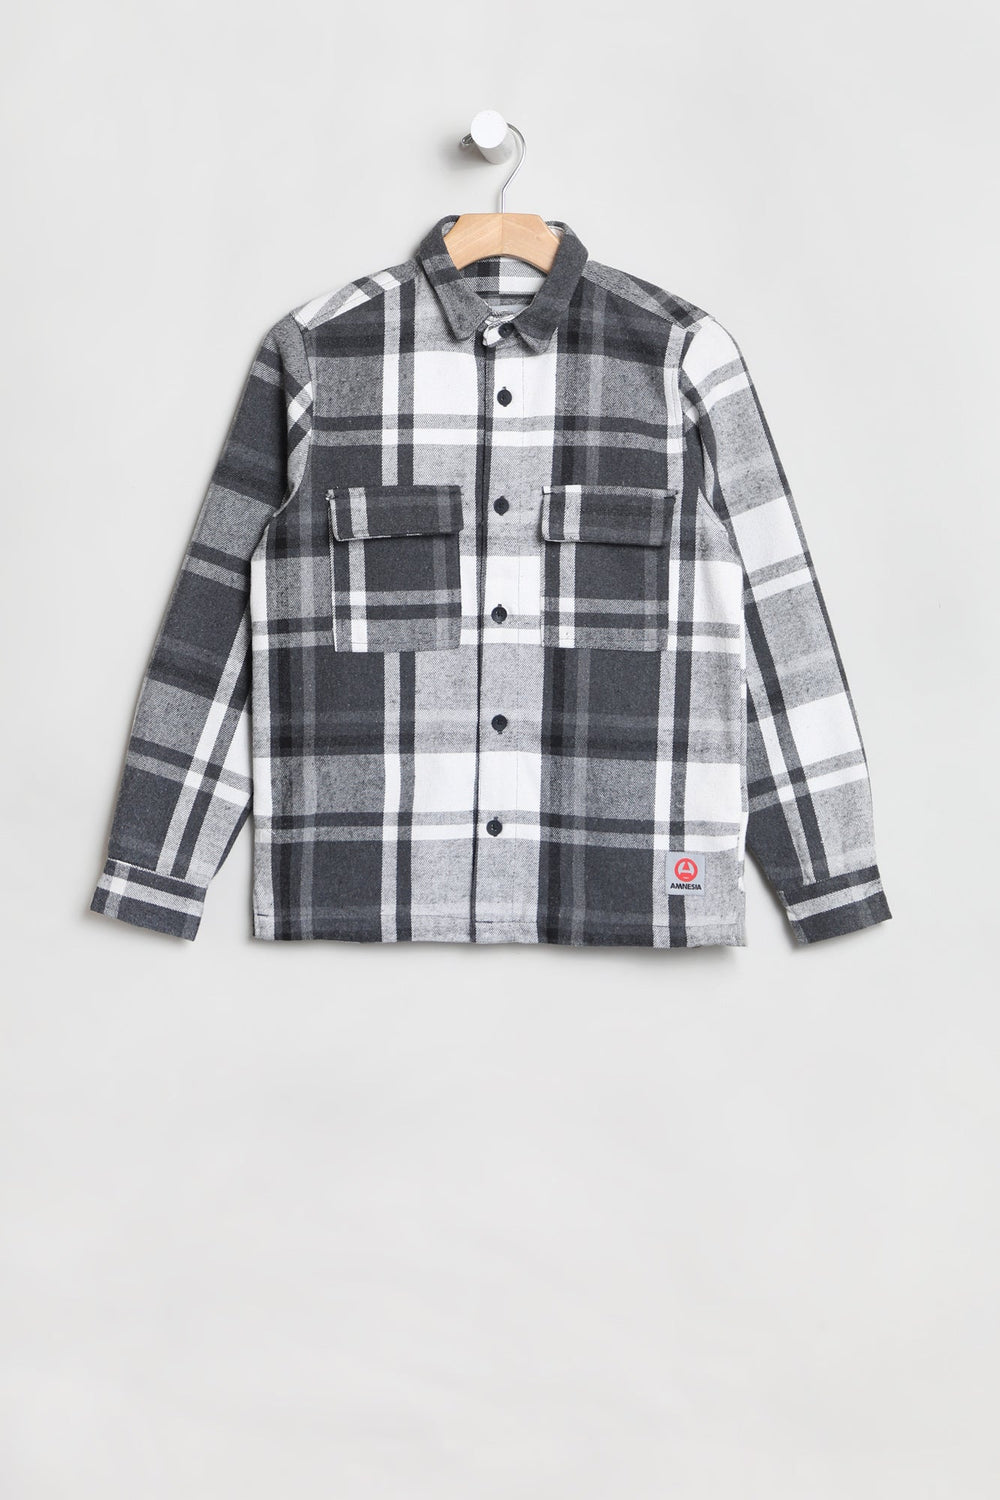 Amnesia Youth Plaid Button-Up Charcoal